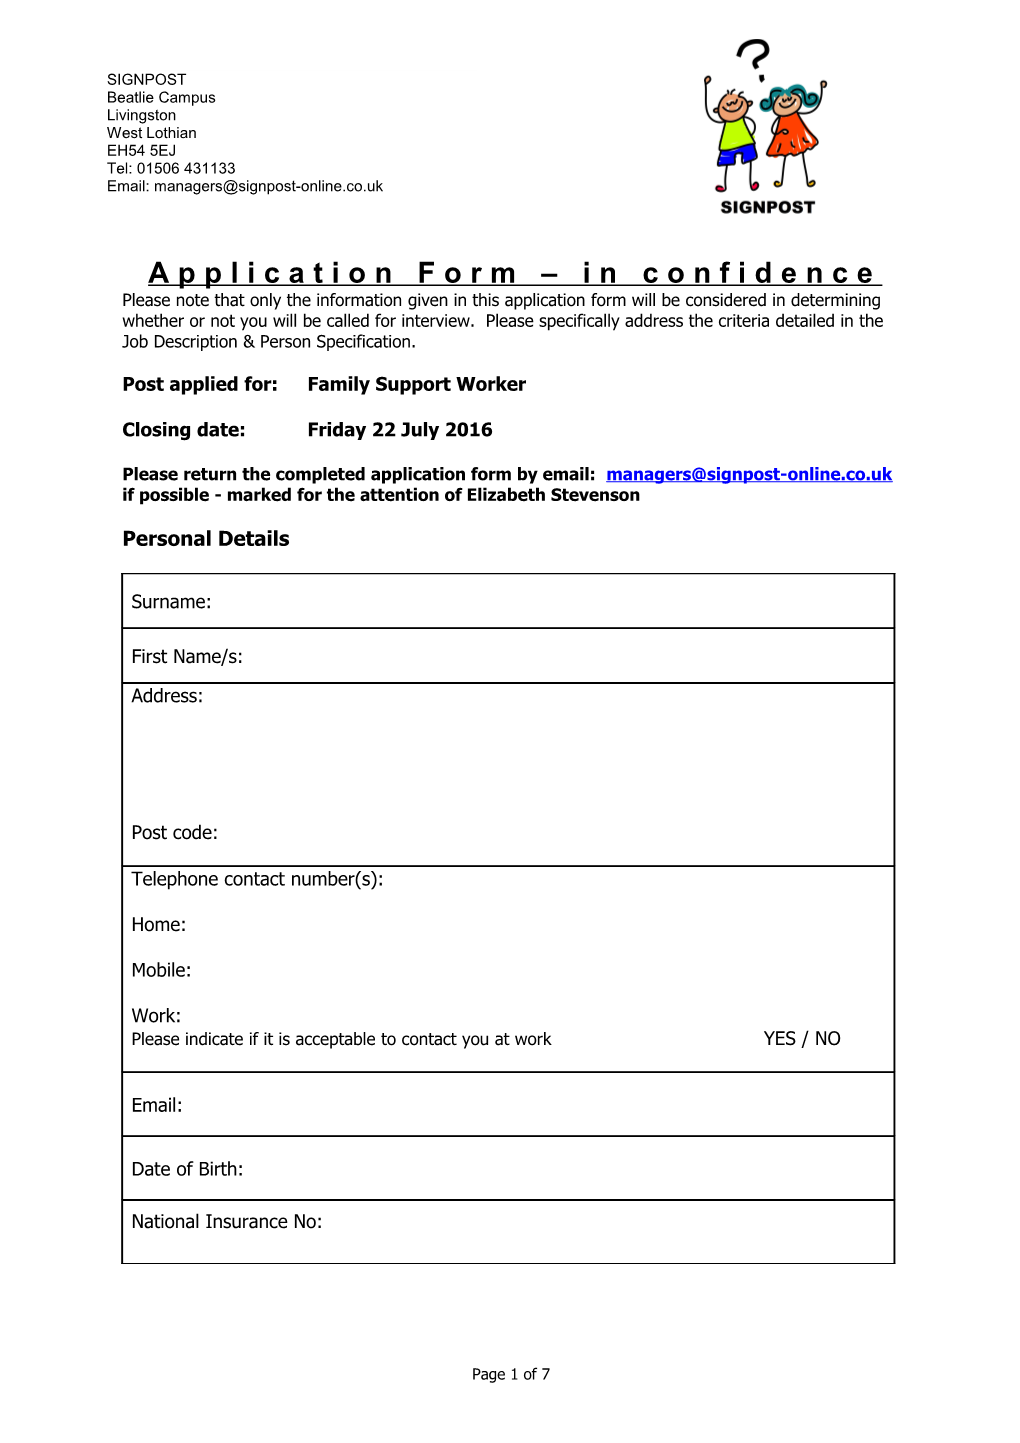 Application Form in Confidence